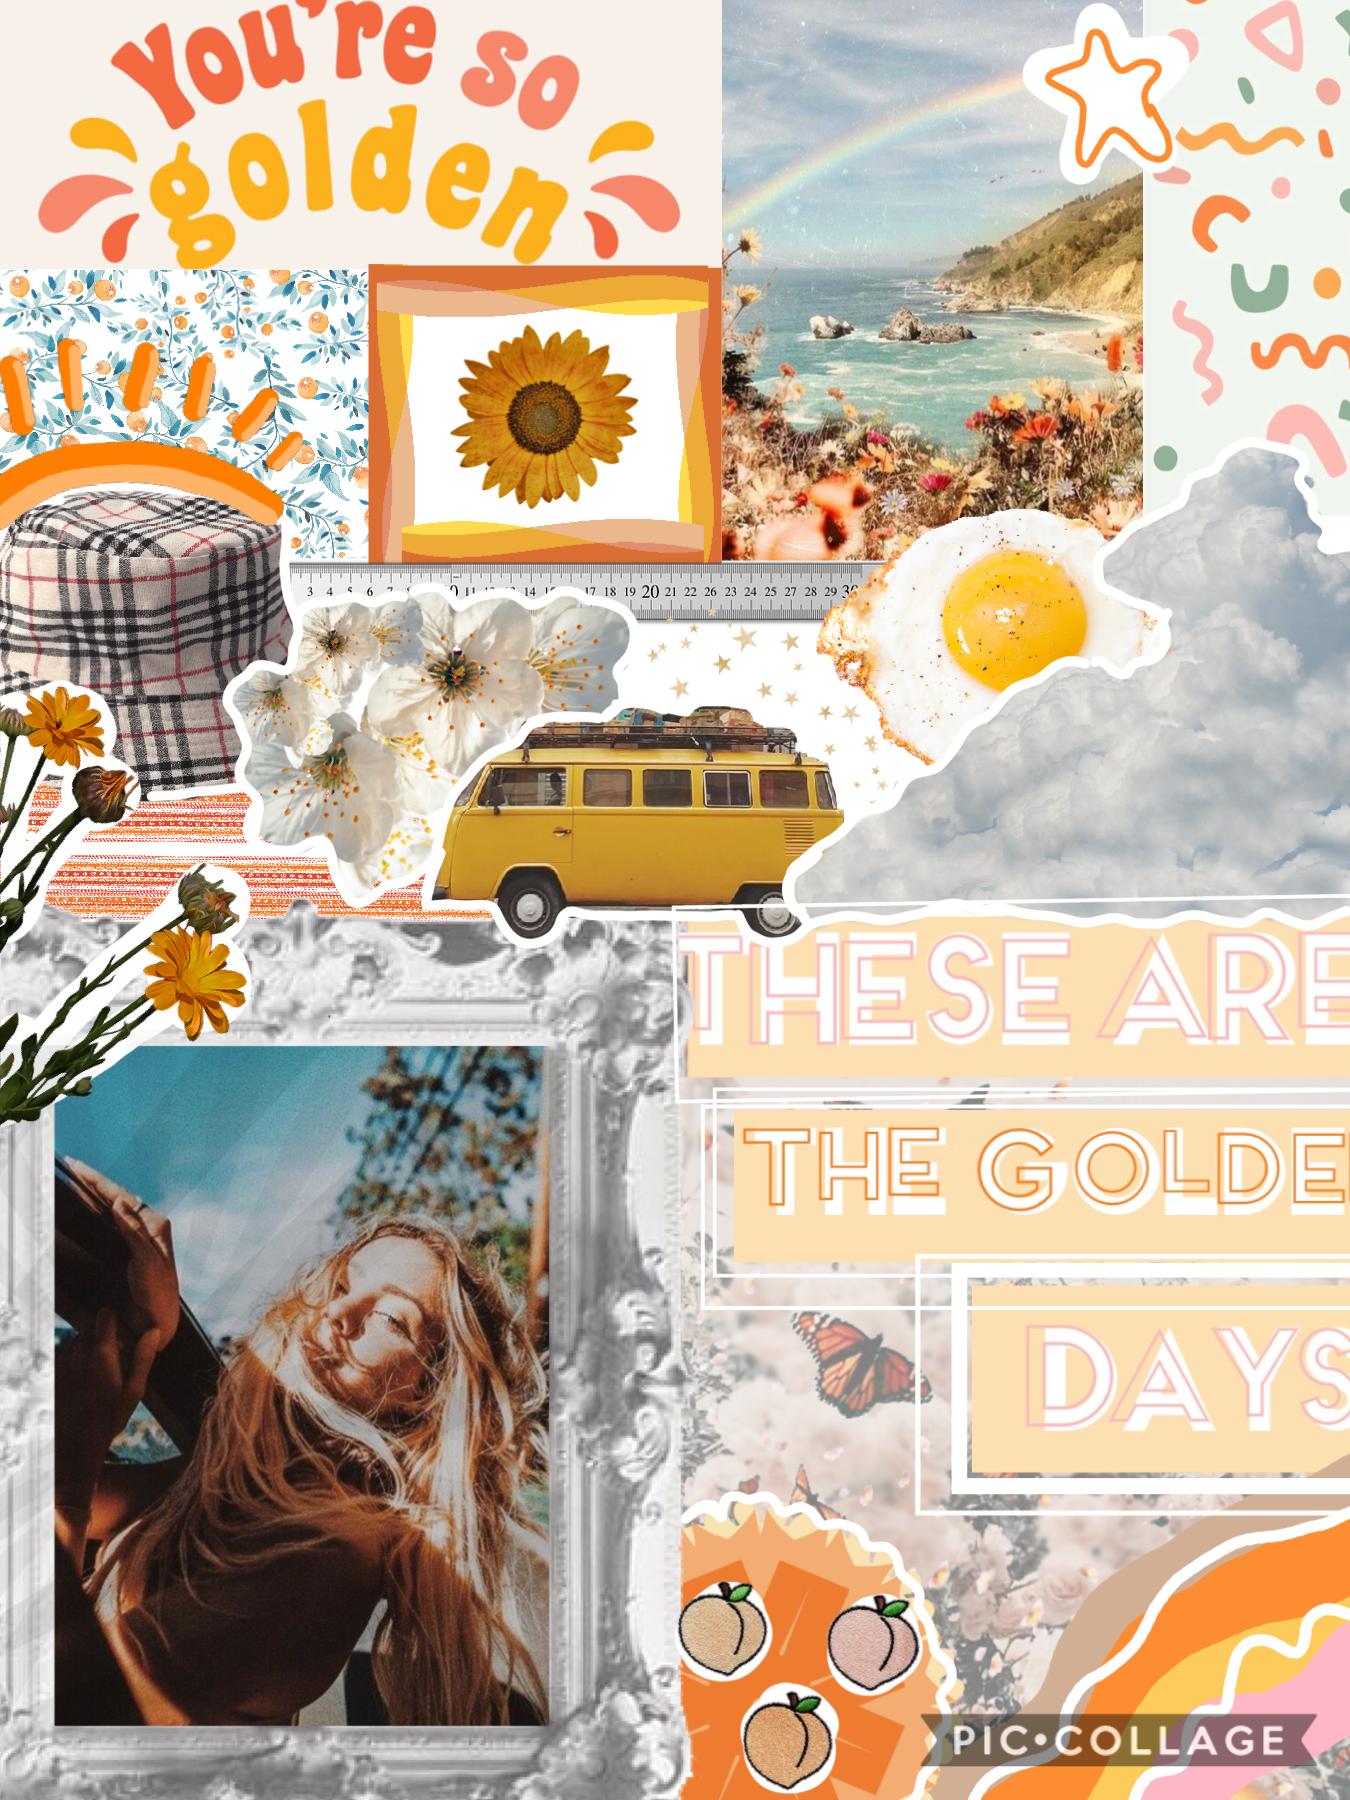 🍌tap me 🍌
Thankyou so much PicCollage for my 7th feature on the spring contest!! I entered an old collage that I posted on my acount a little while ago. Anyways hope you like this collage, I quite like how it turned out!☺️💕